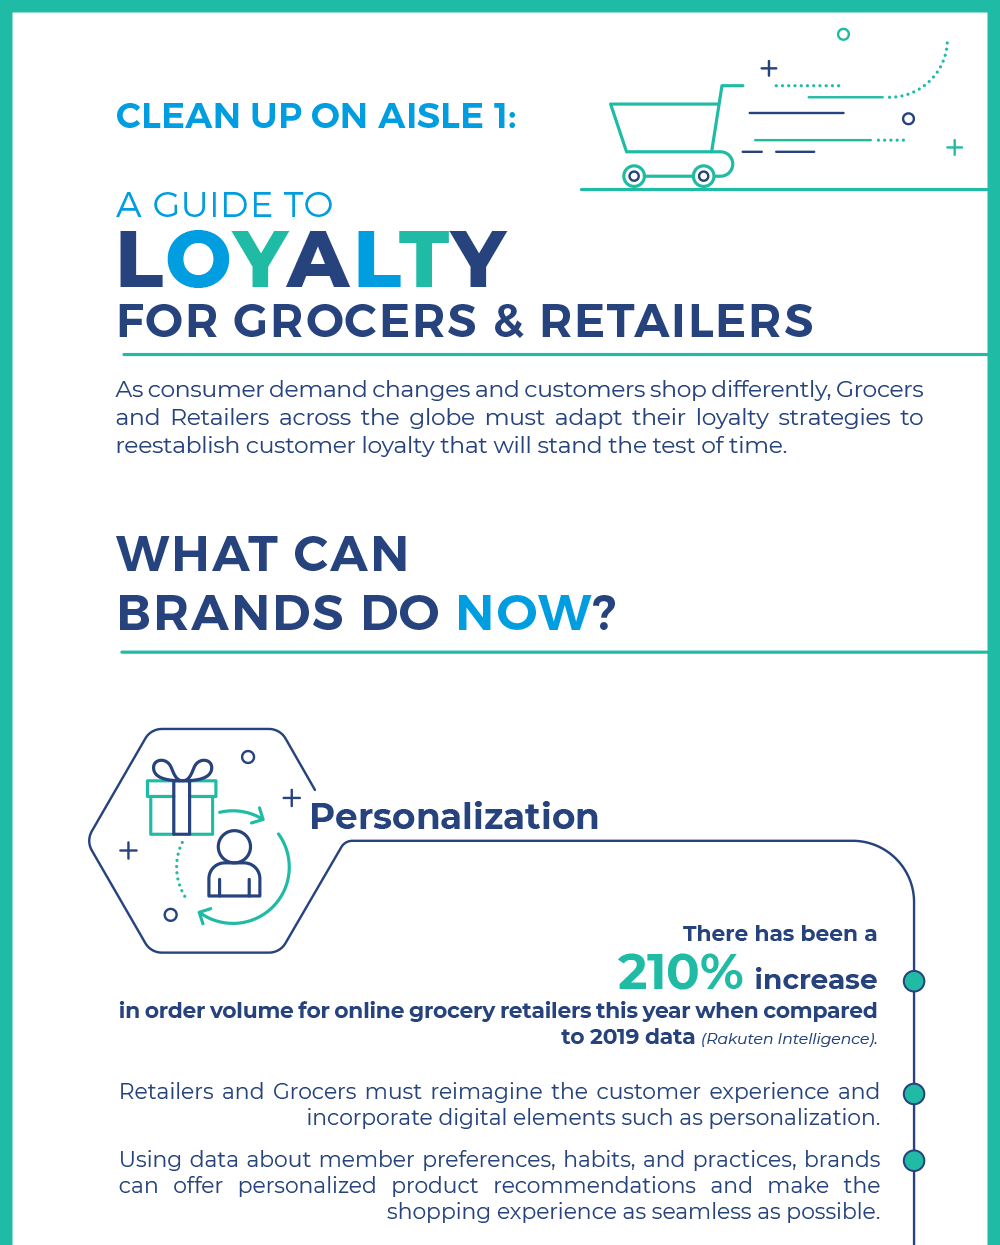 Loyalty for Grocers and Retailers